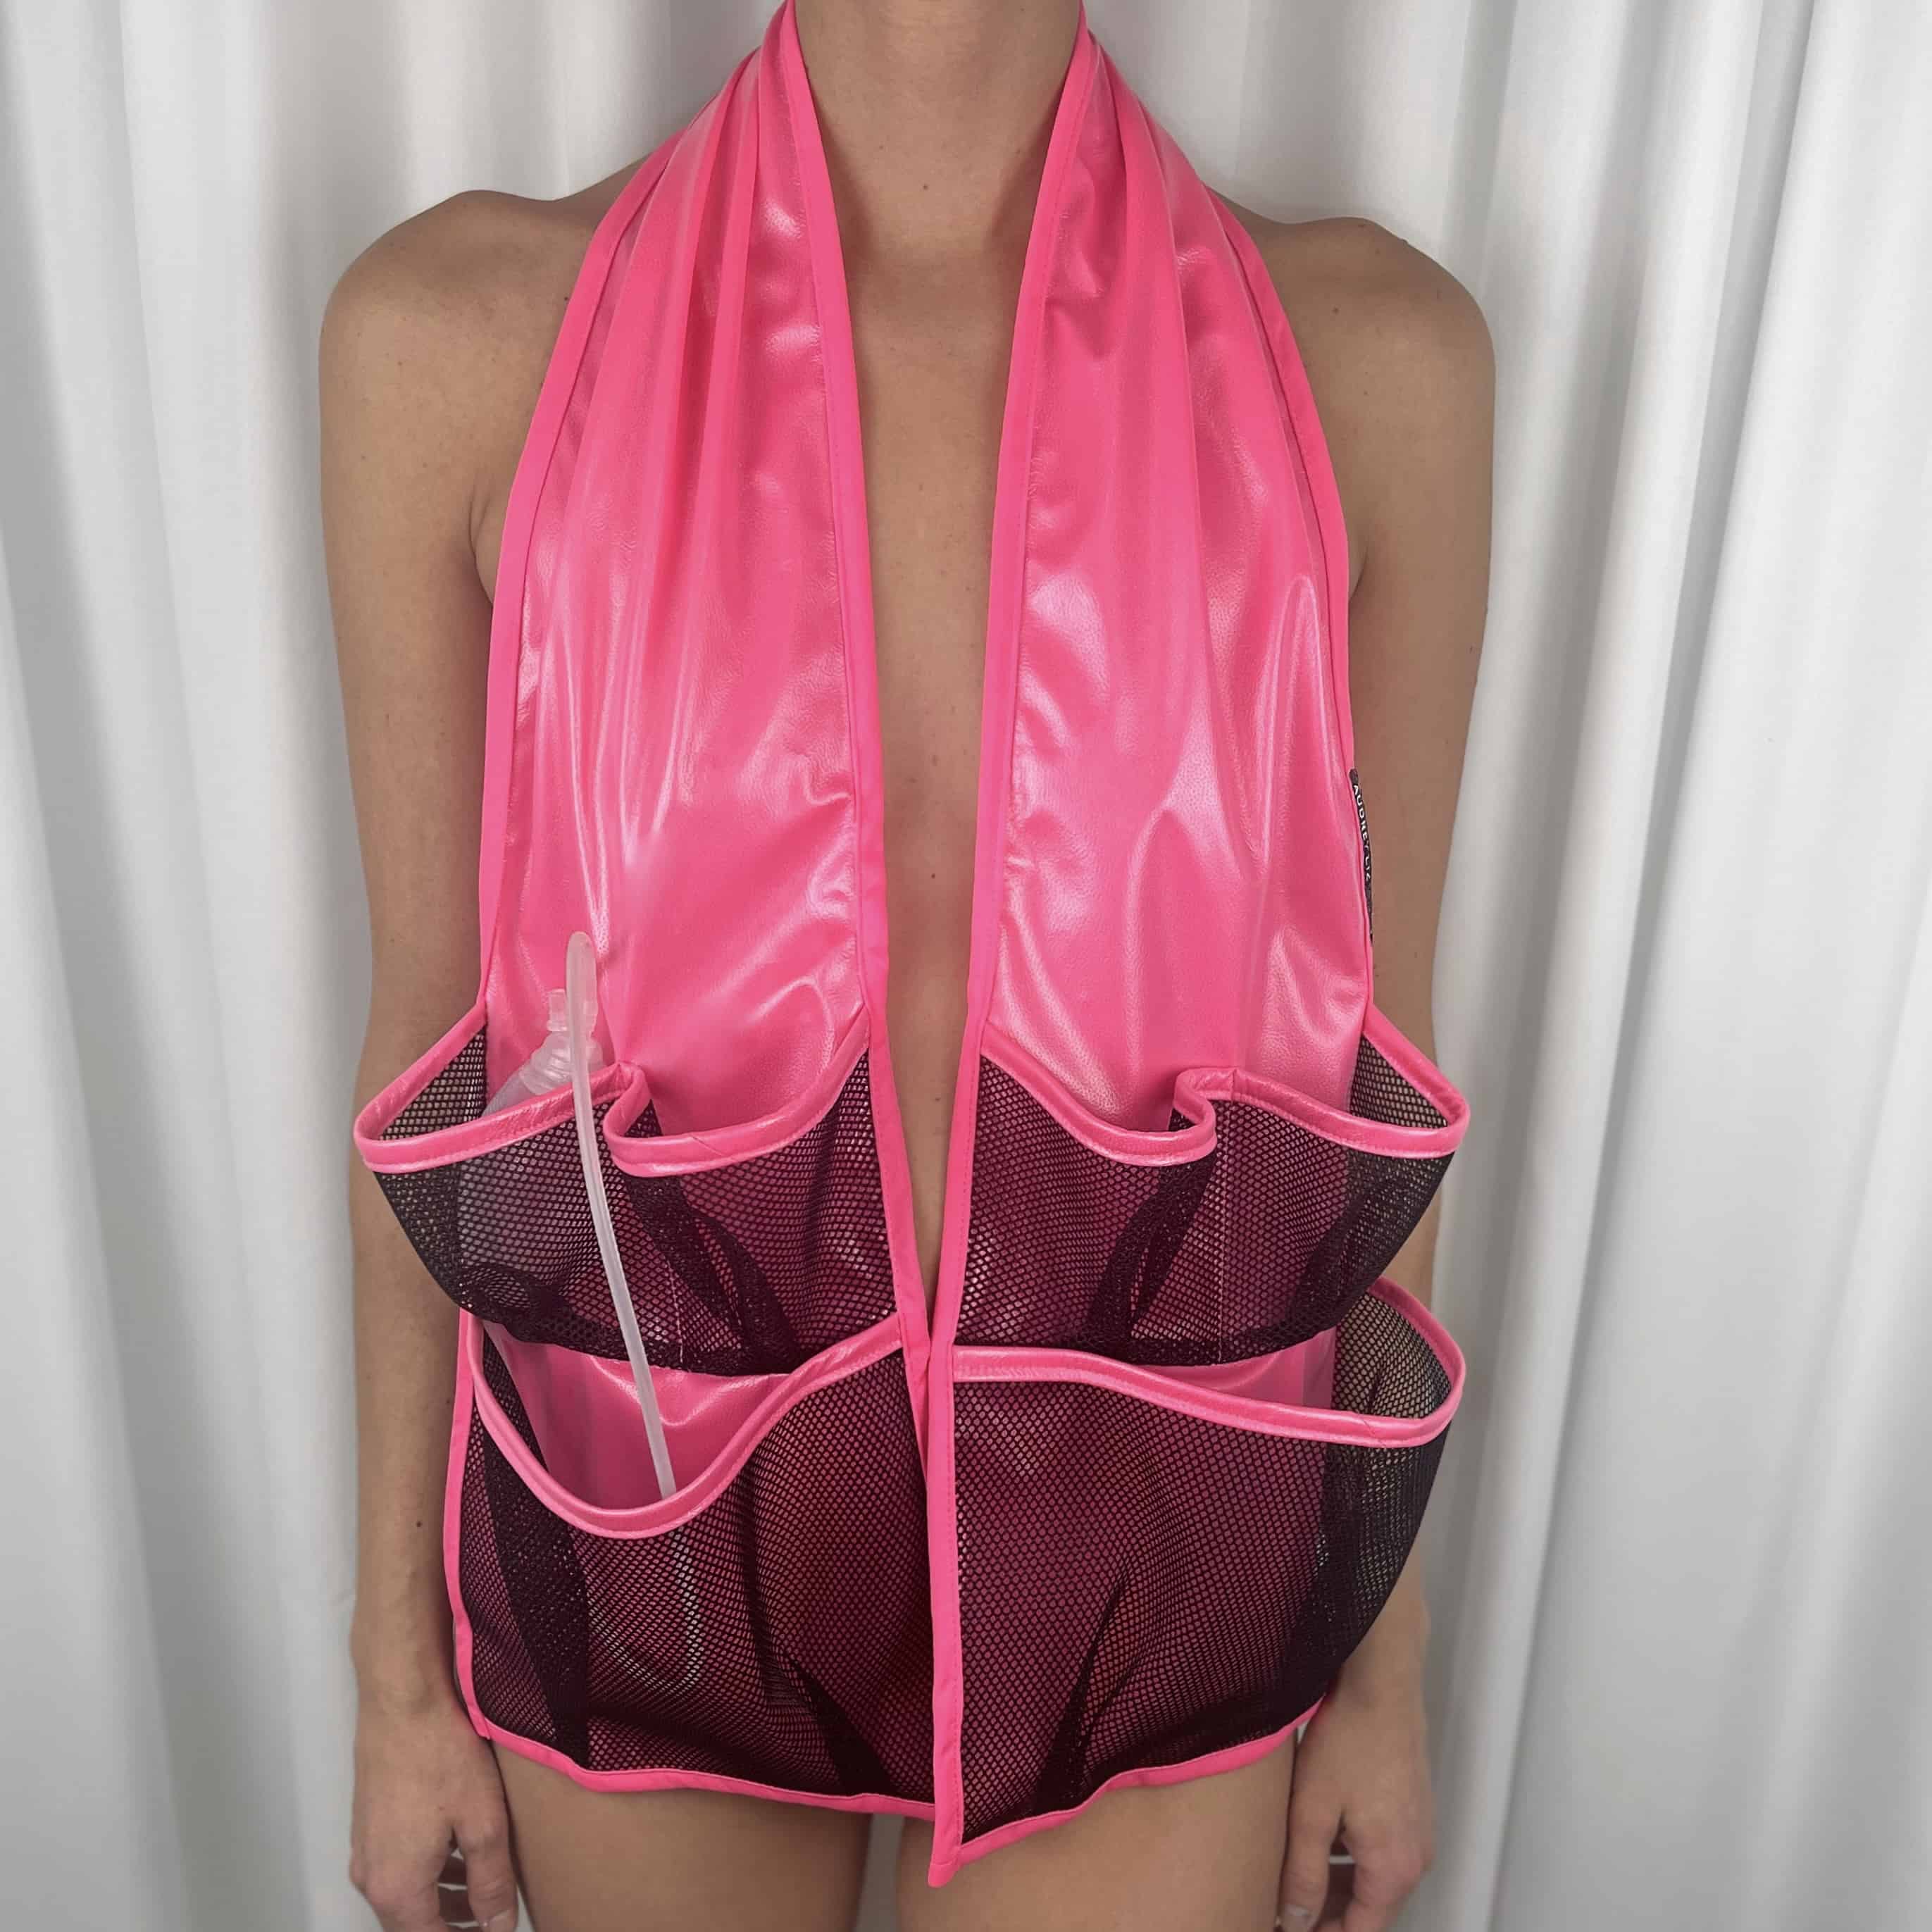 Body of woman wearing a bright pink waterproof scarf with mesh pockets. Post-surgery drains and tubing are placed in the pockets.